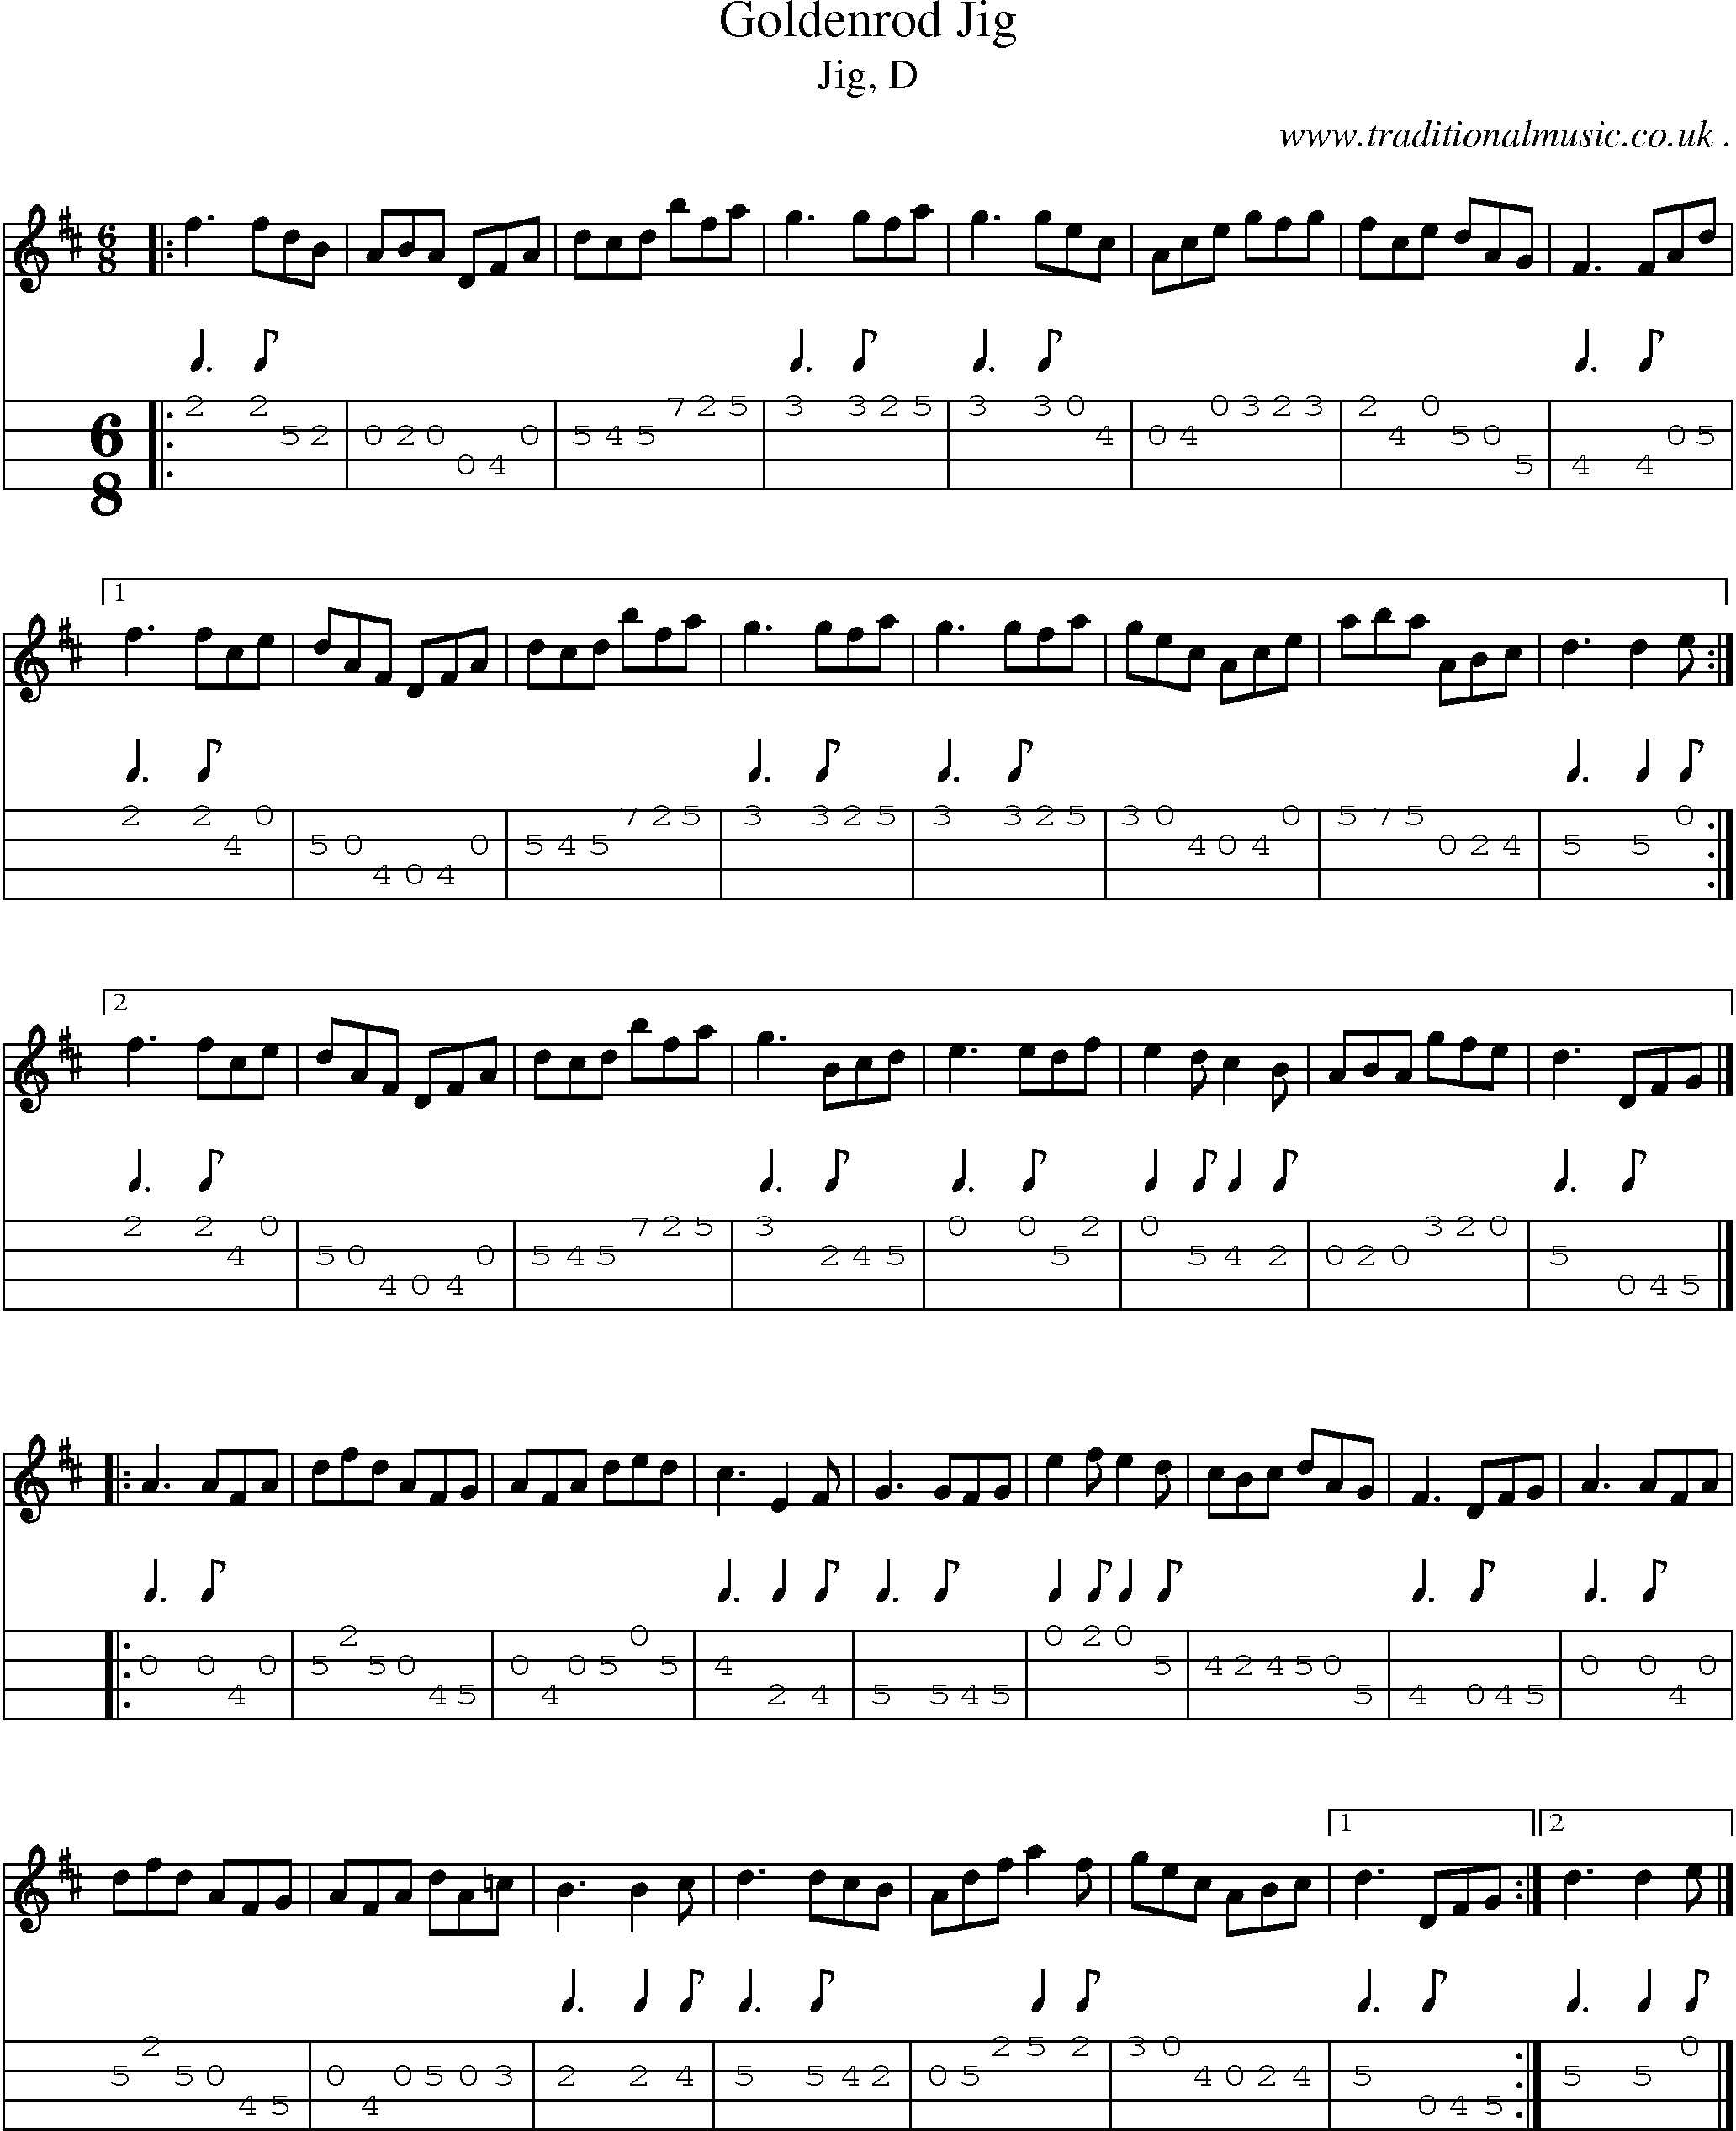 Sheet-music  score, Chords and Mandolin Tabs for Goldenrod Jig